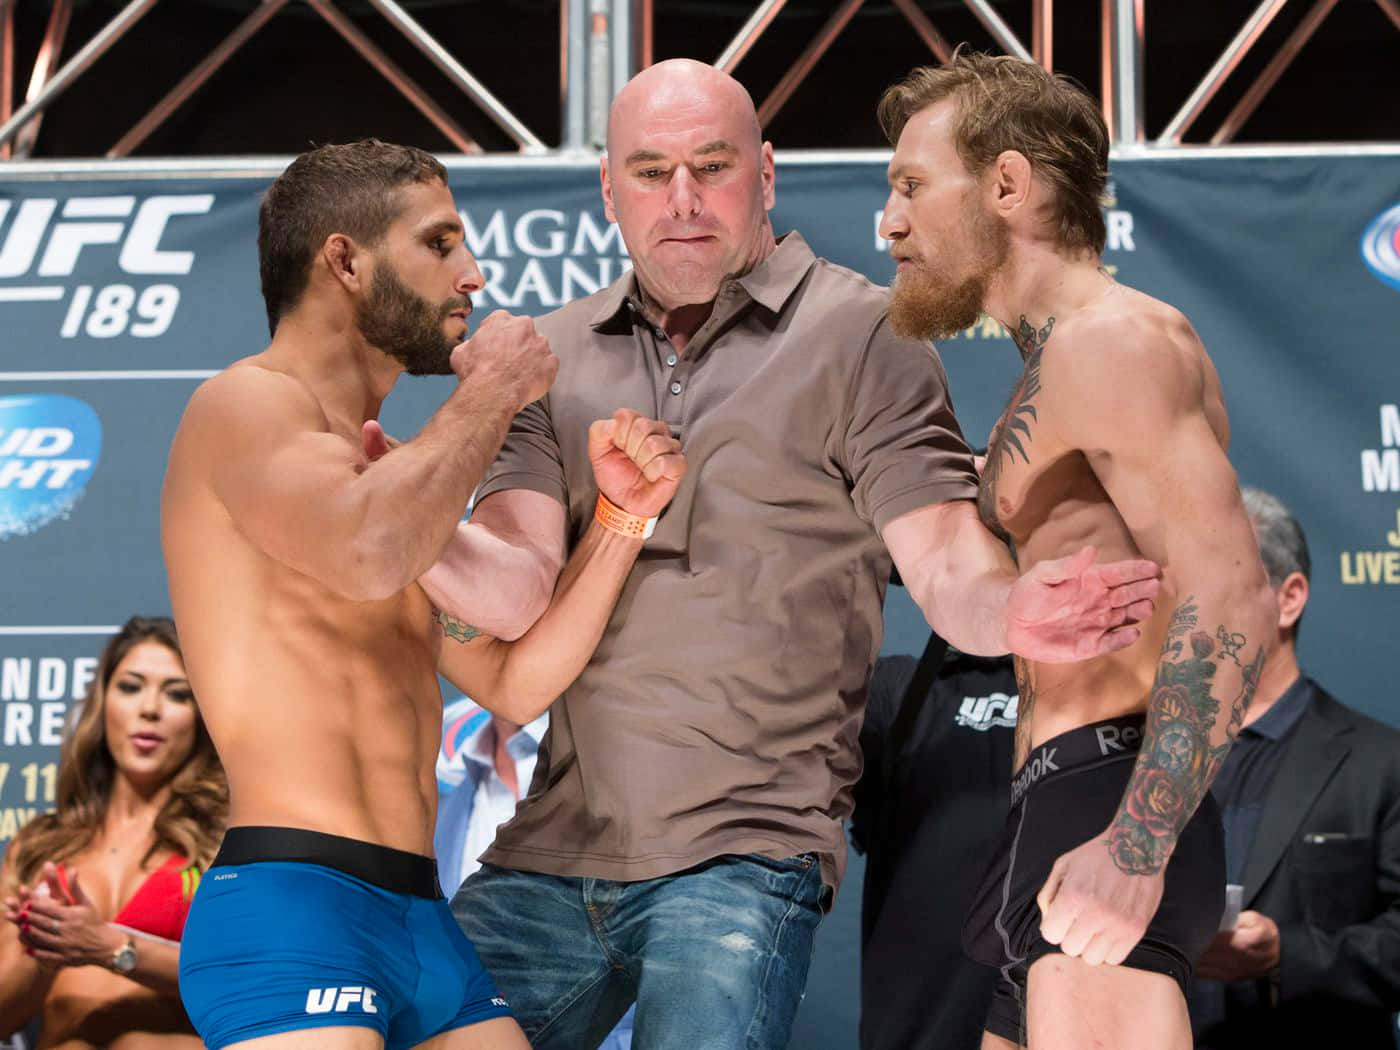 Chad Mendes Ufc 189 Face-off Event Wallpaper